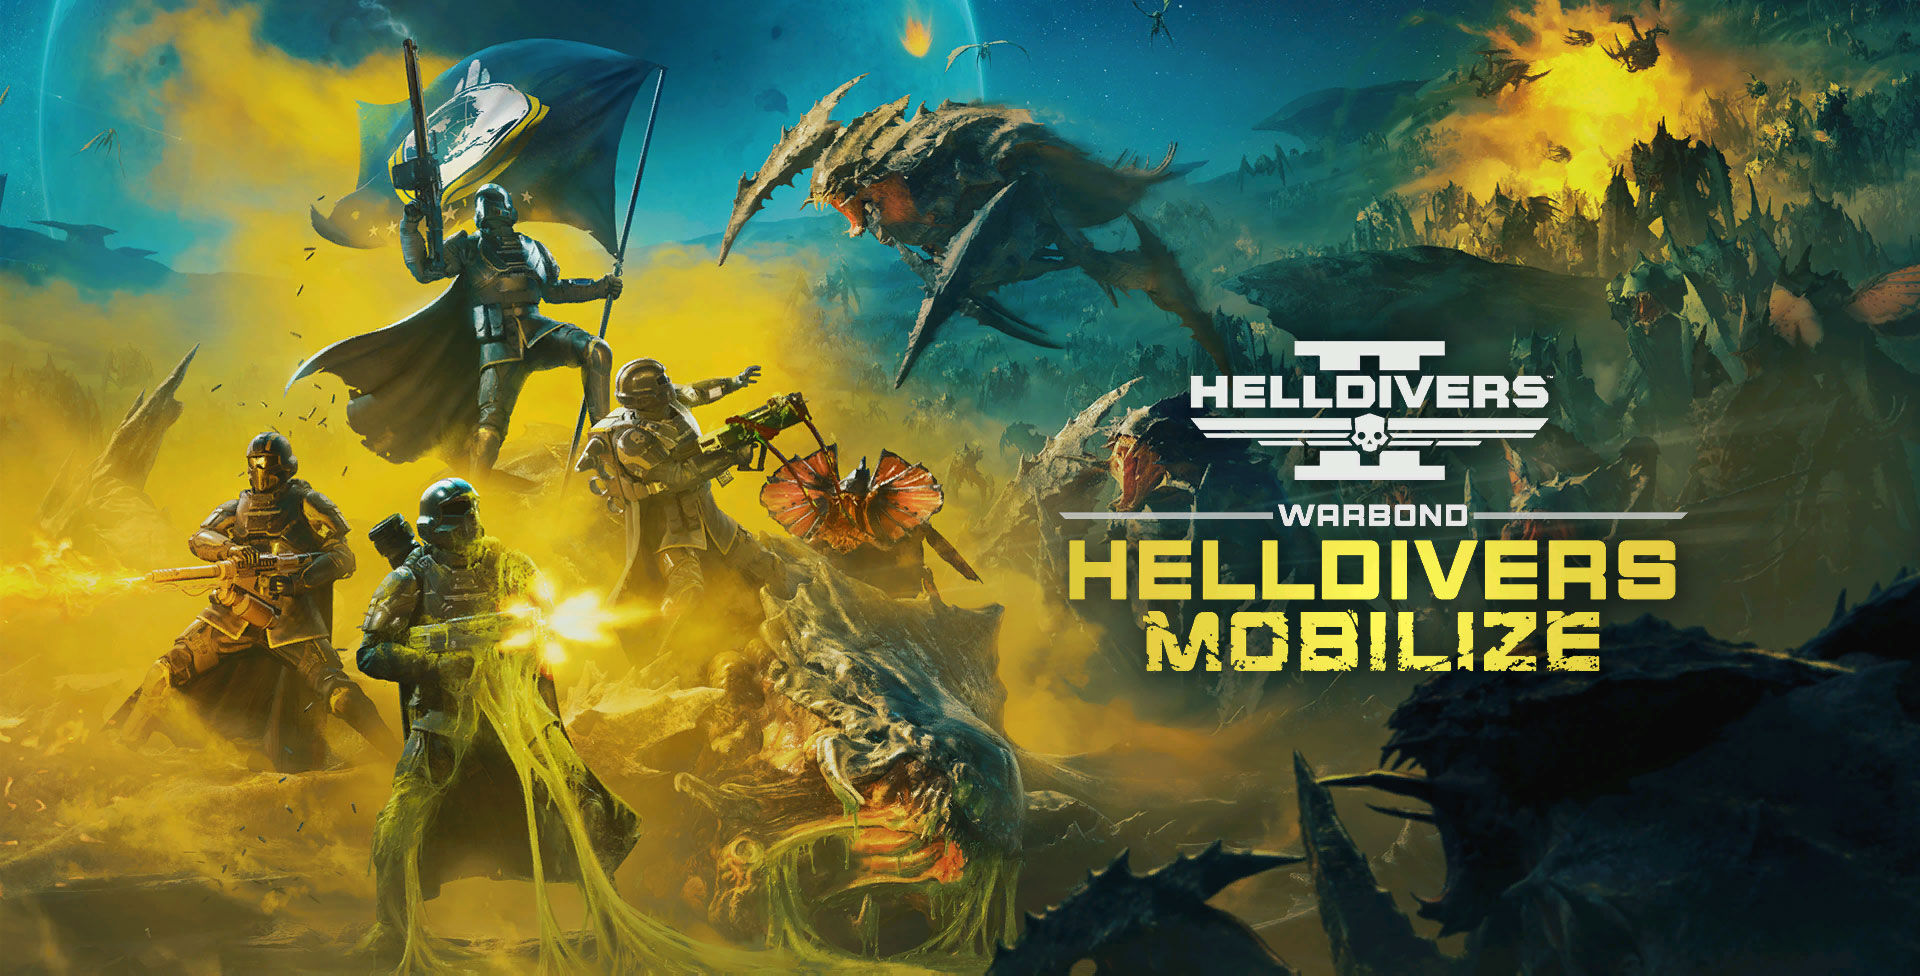 Helldivers Mobilize! | hd2.gg